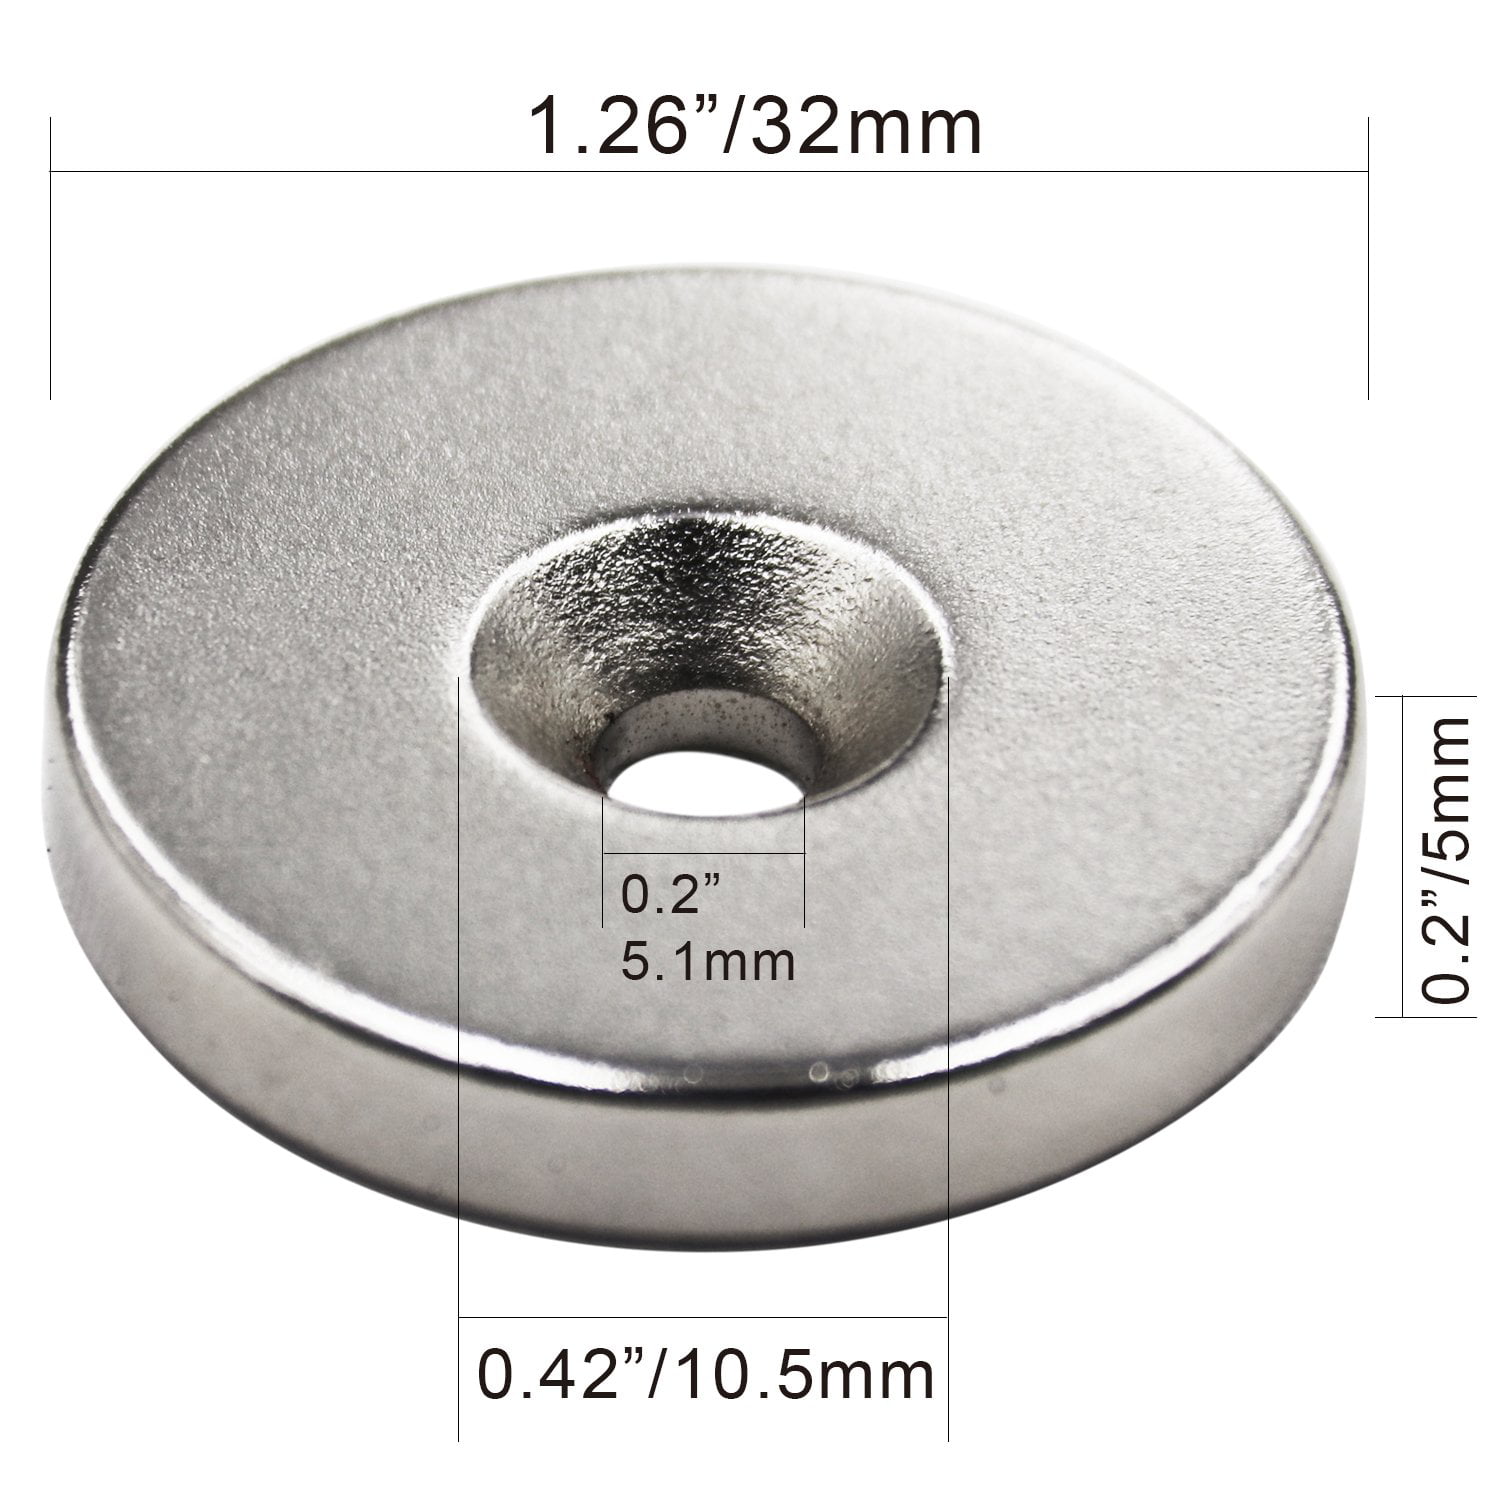 Neodymium Disc Countersunk Hole Magnet 1.26"D x 0.2"H Strong Permanent 